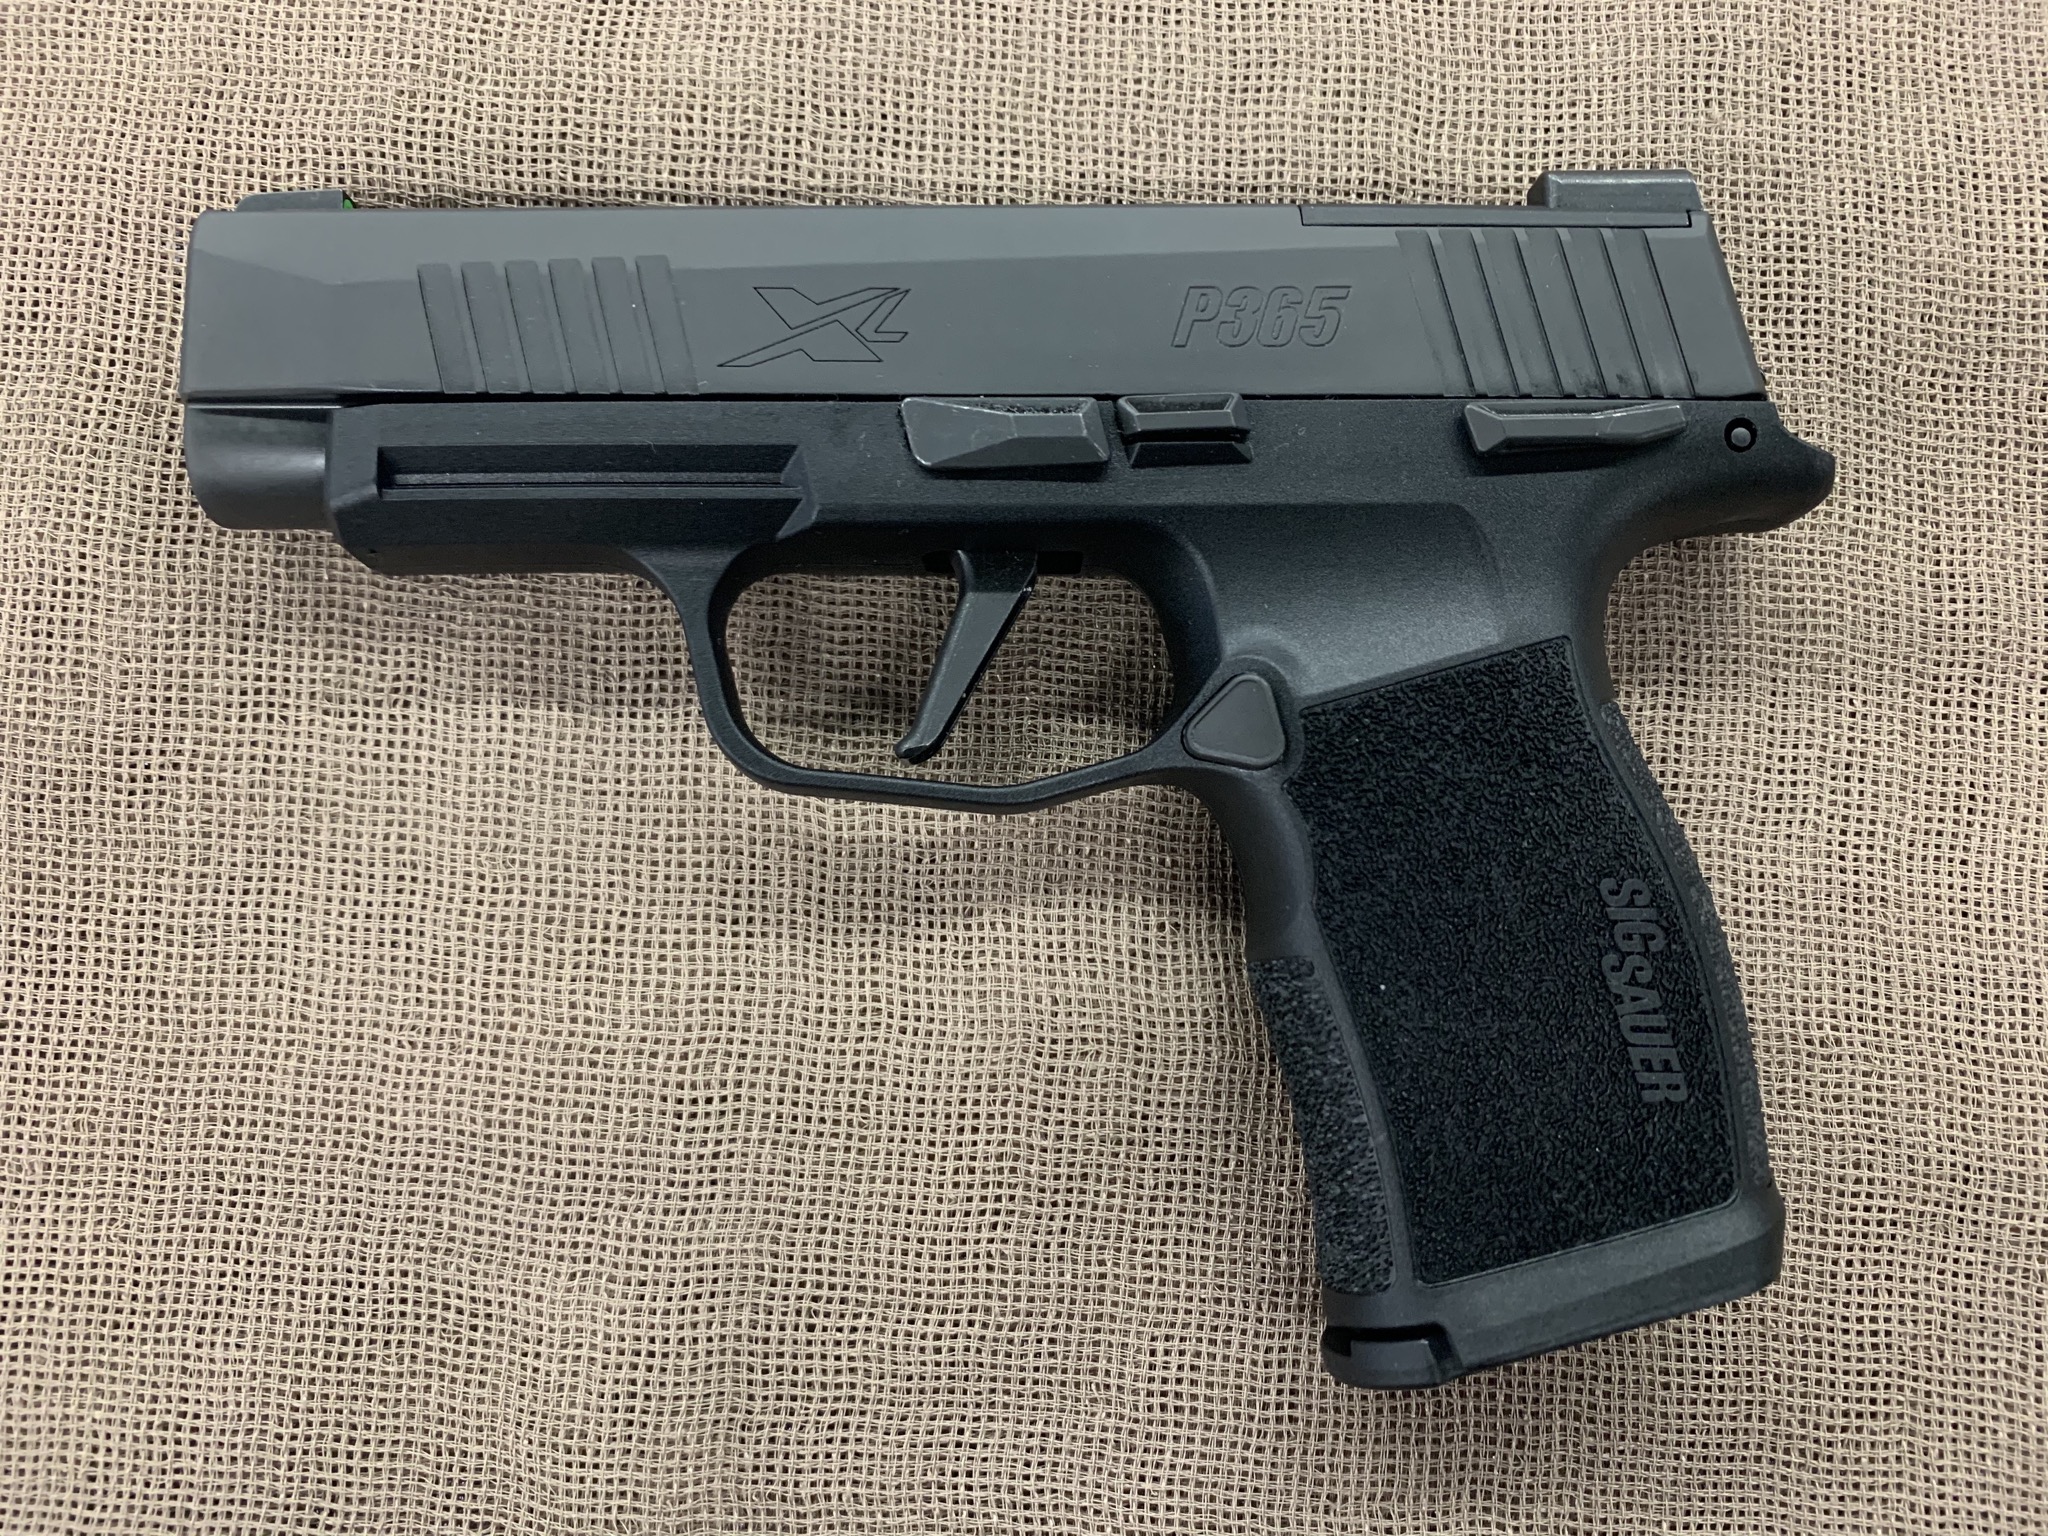 Does The Sig P365 Have A Thumb Safety